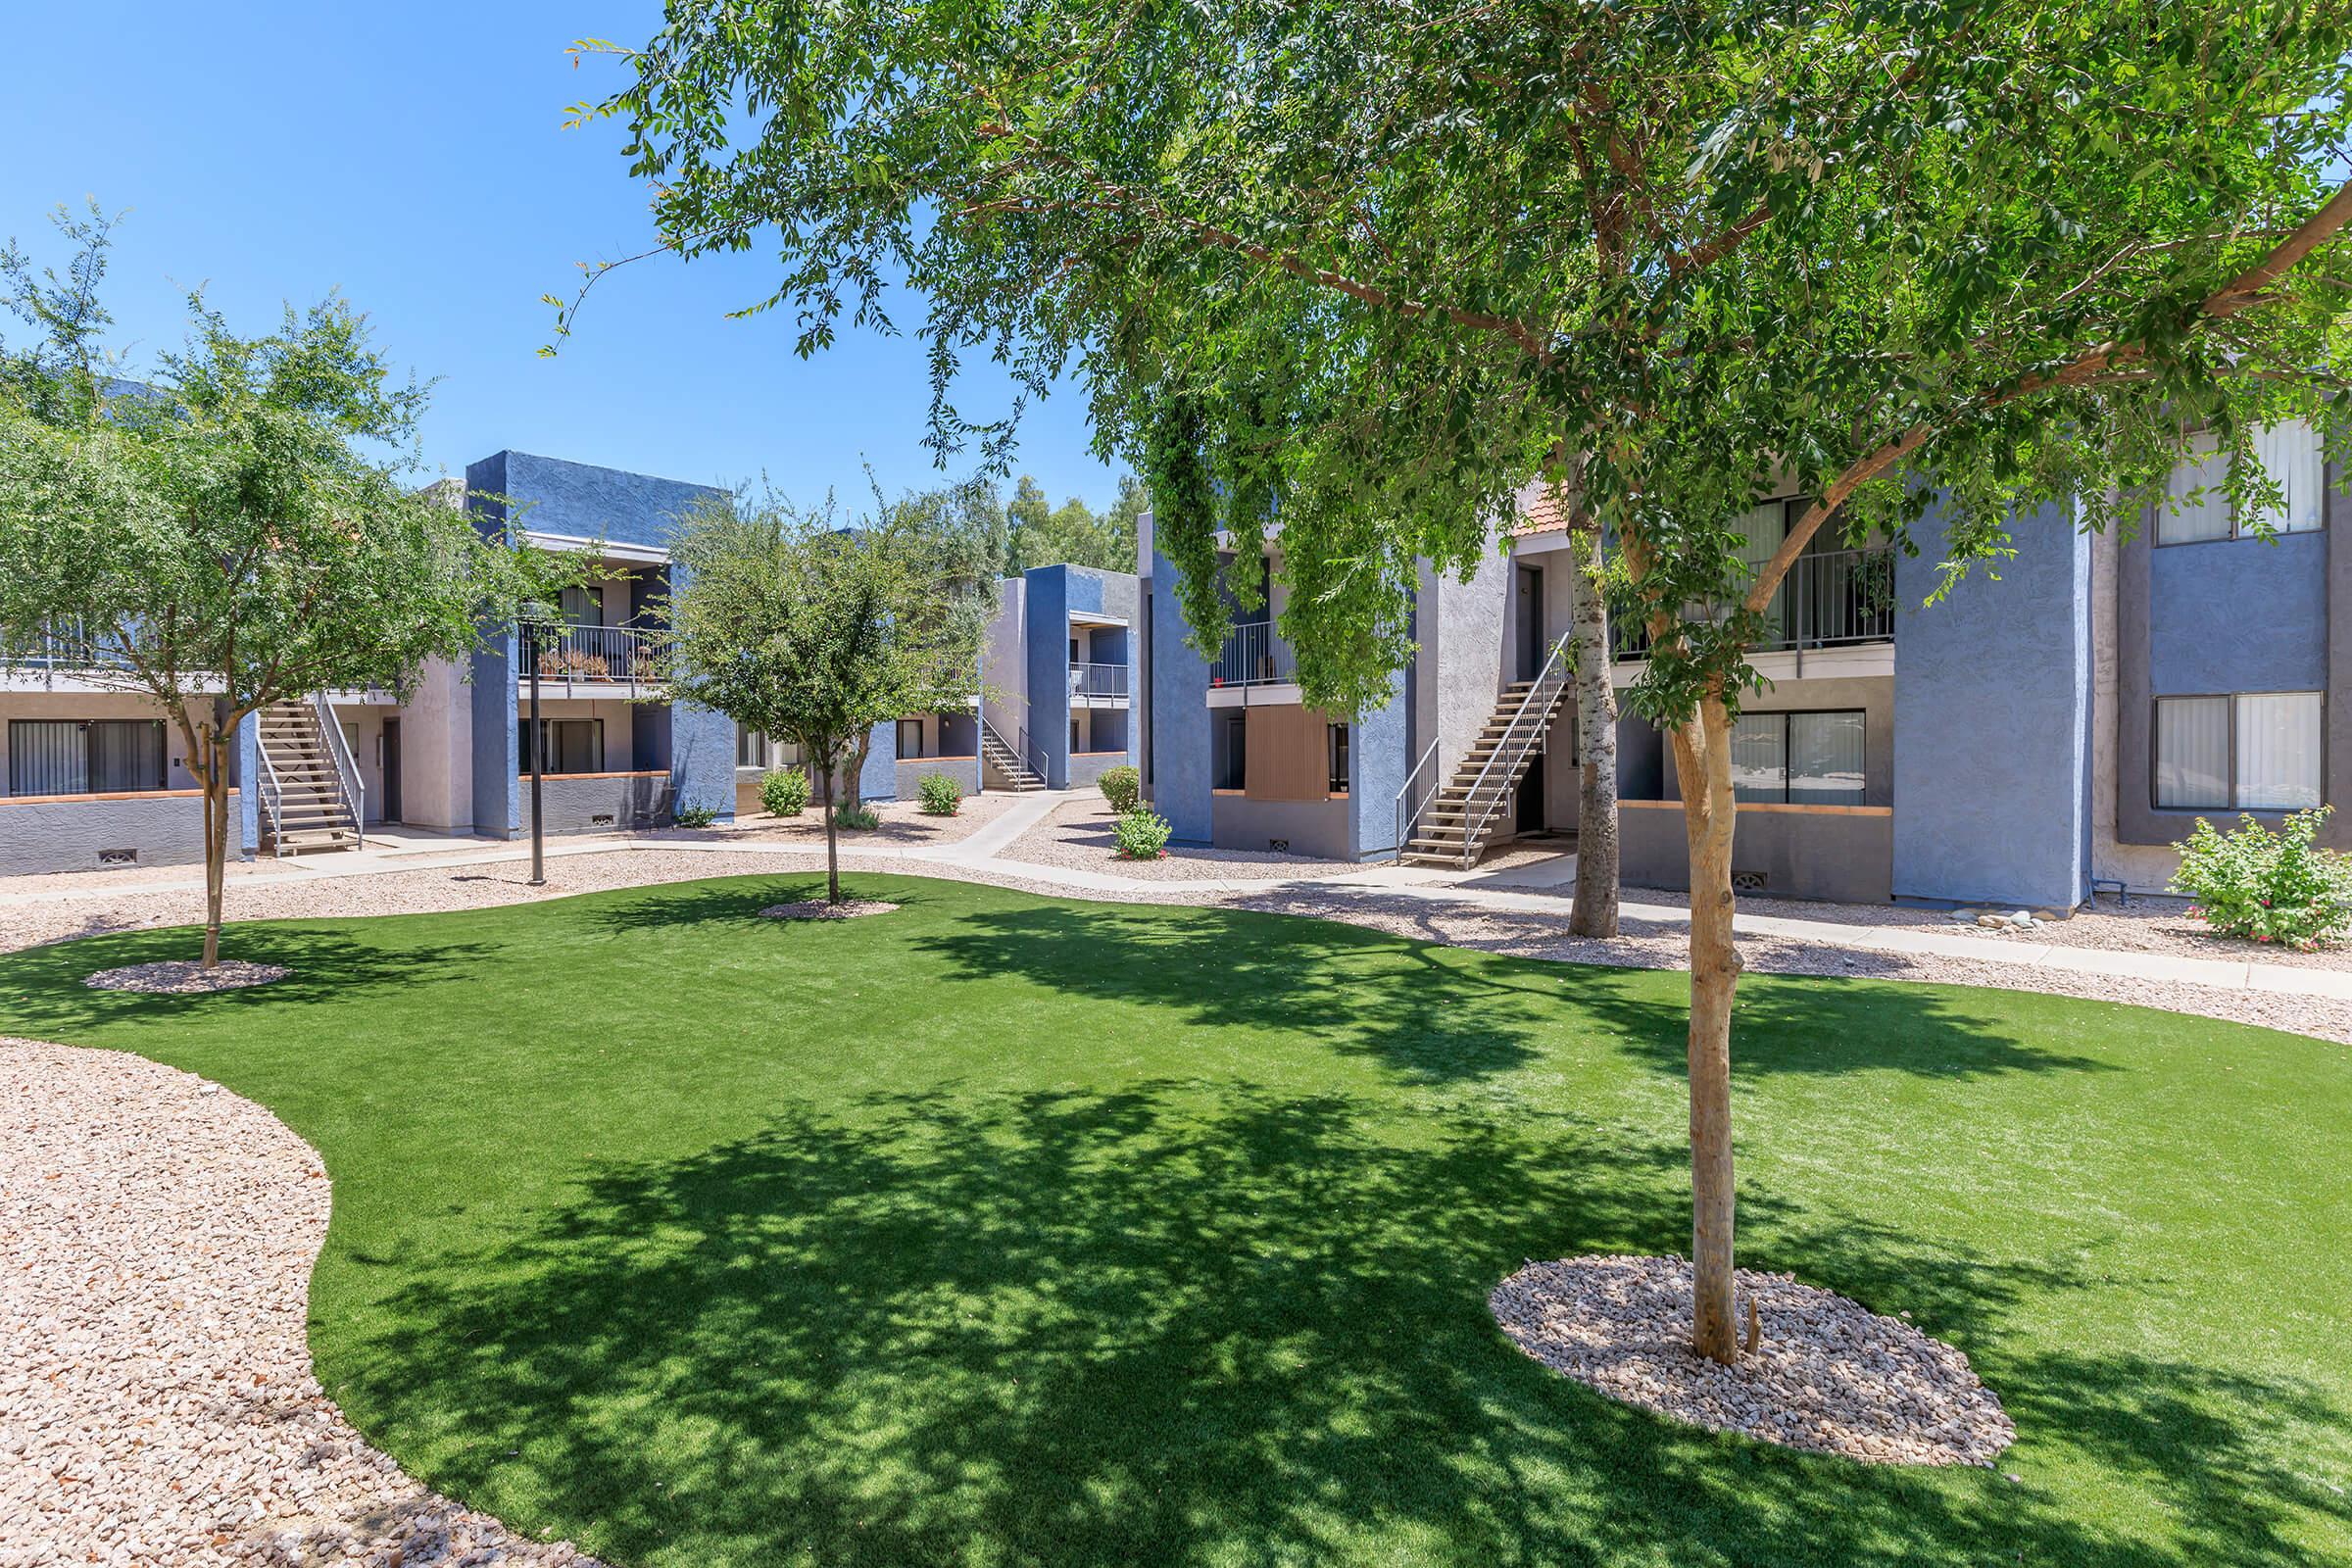 Grass courtyard with trees and shade in front of large apartment buildings at Rise Desert West 